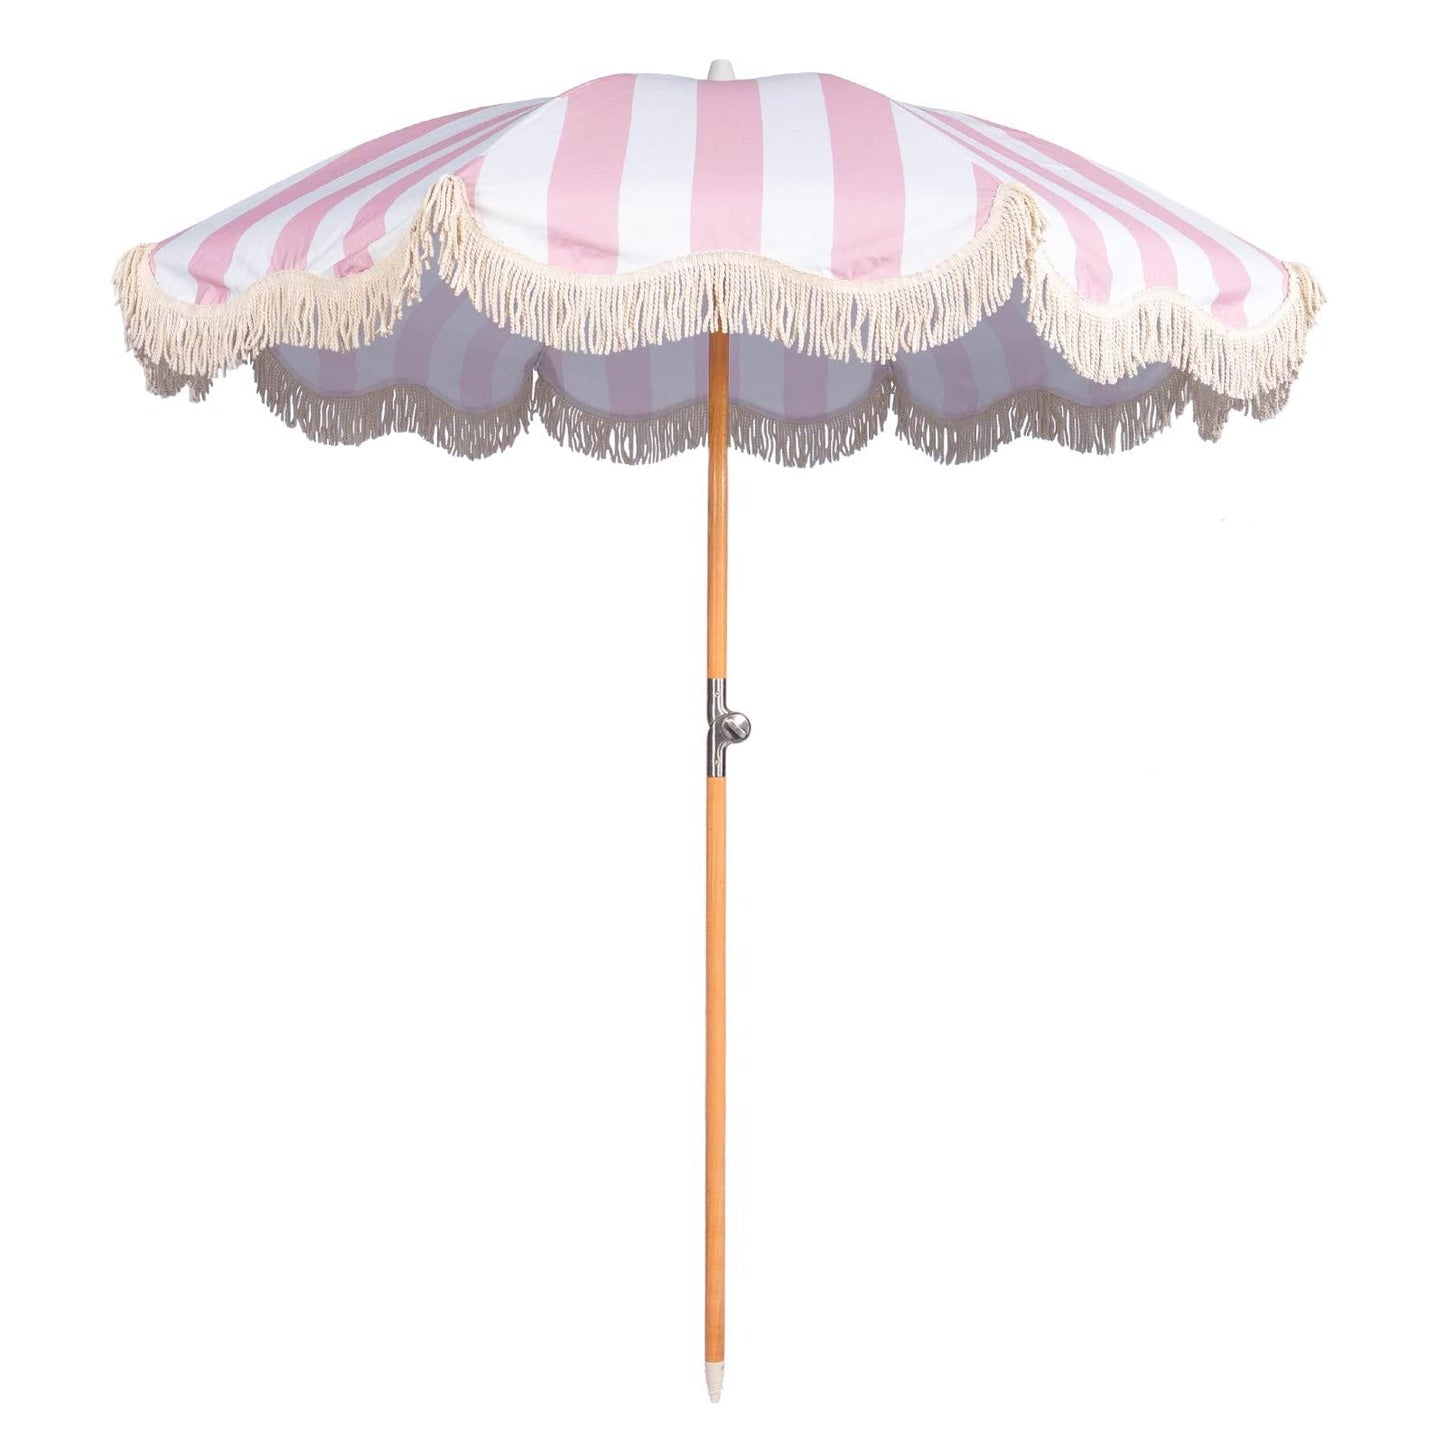 Funsite 6.5ft Boho Beach Umbrella with Fringe, UPF 50+ Tassel Umbrellas with Carry Bag, Premium Wood Pole Foldable Patio Umbrella for Outdoor Holiday Garden Lawn Pool Yard Table, Pink Stripe - CookCave